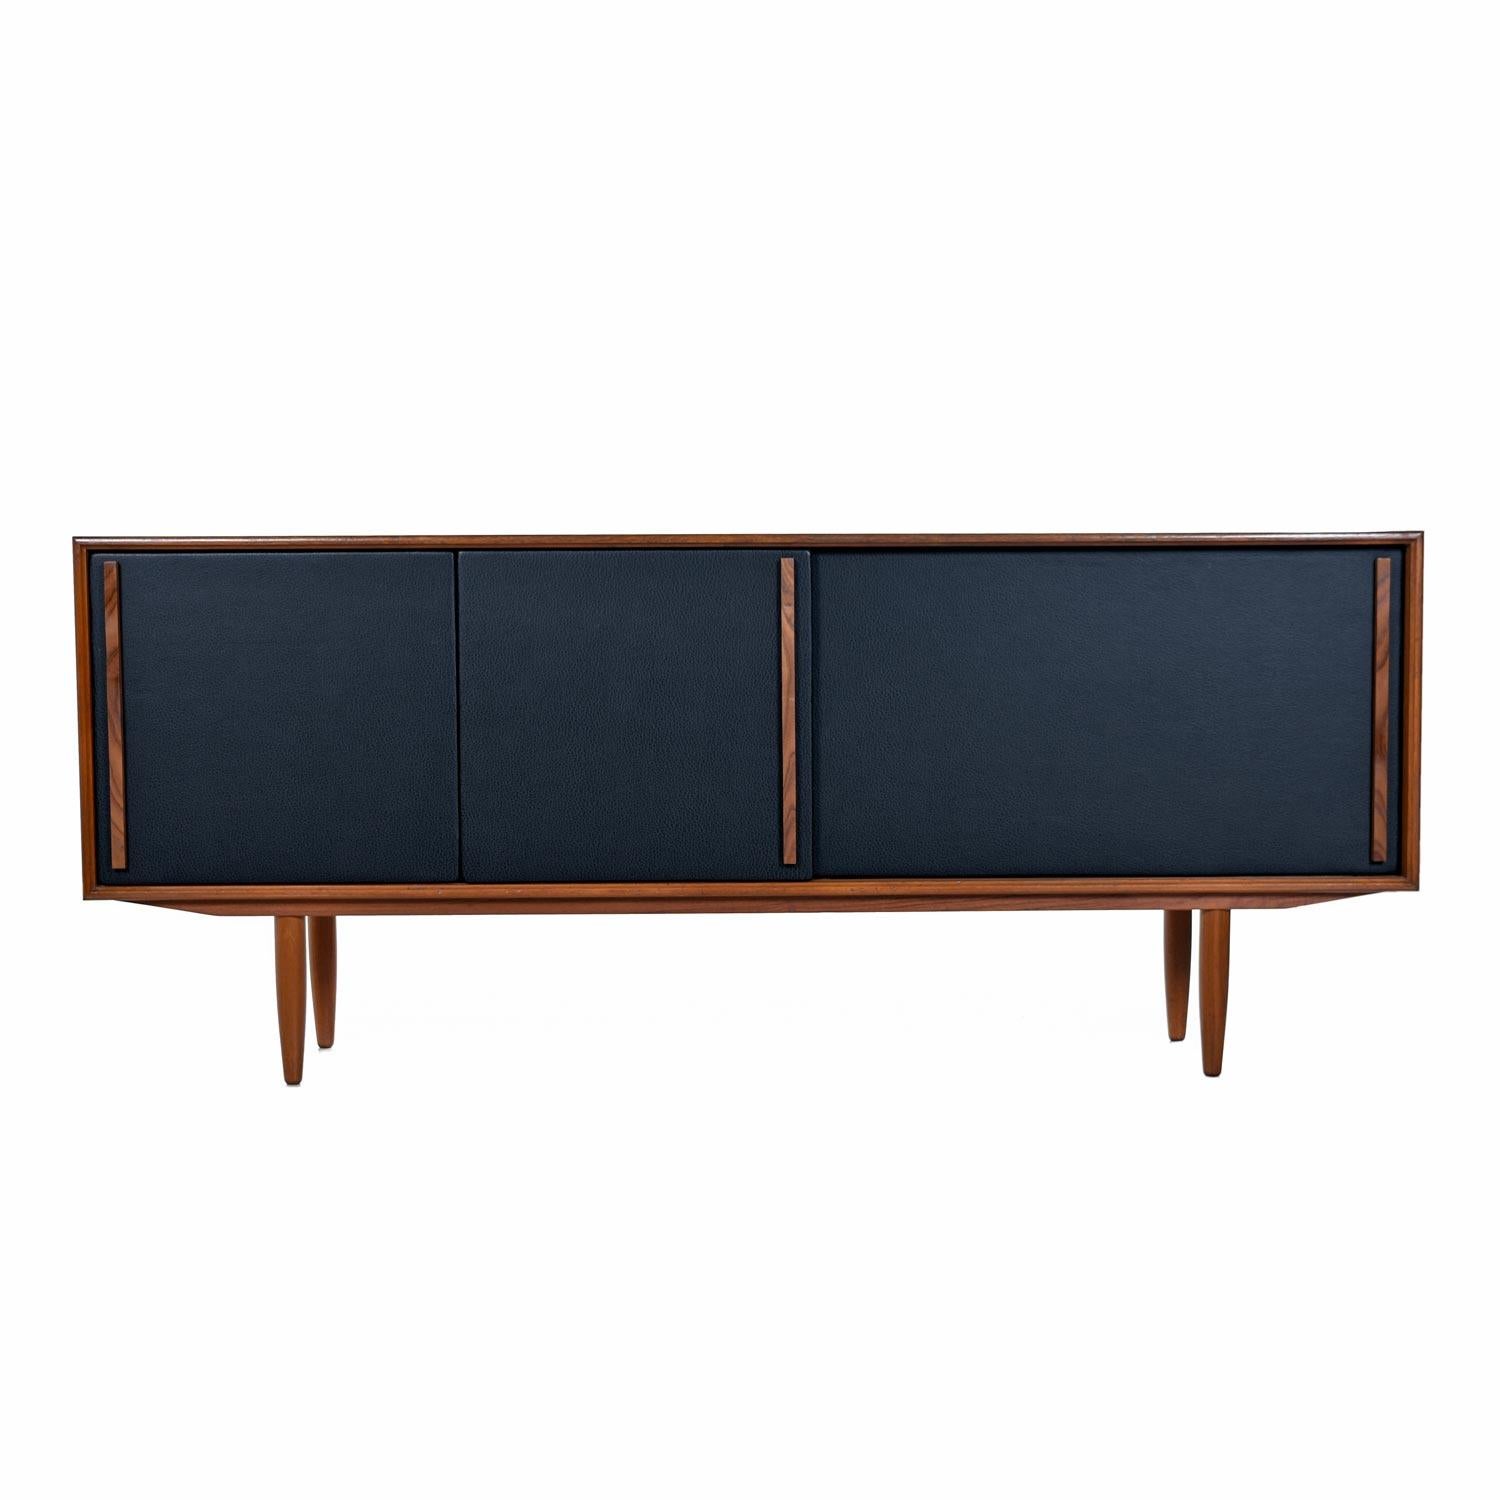 One-of-a-kind midcentury Scandinavian Modern Danish teak credenza by Gunni Oman for Axel Christensen Odder Mobler. 

What makes this one of a kind? Well, the original sliding doors had severely damaged pulls, so our rehabilitation team